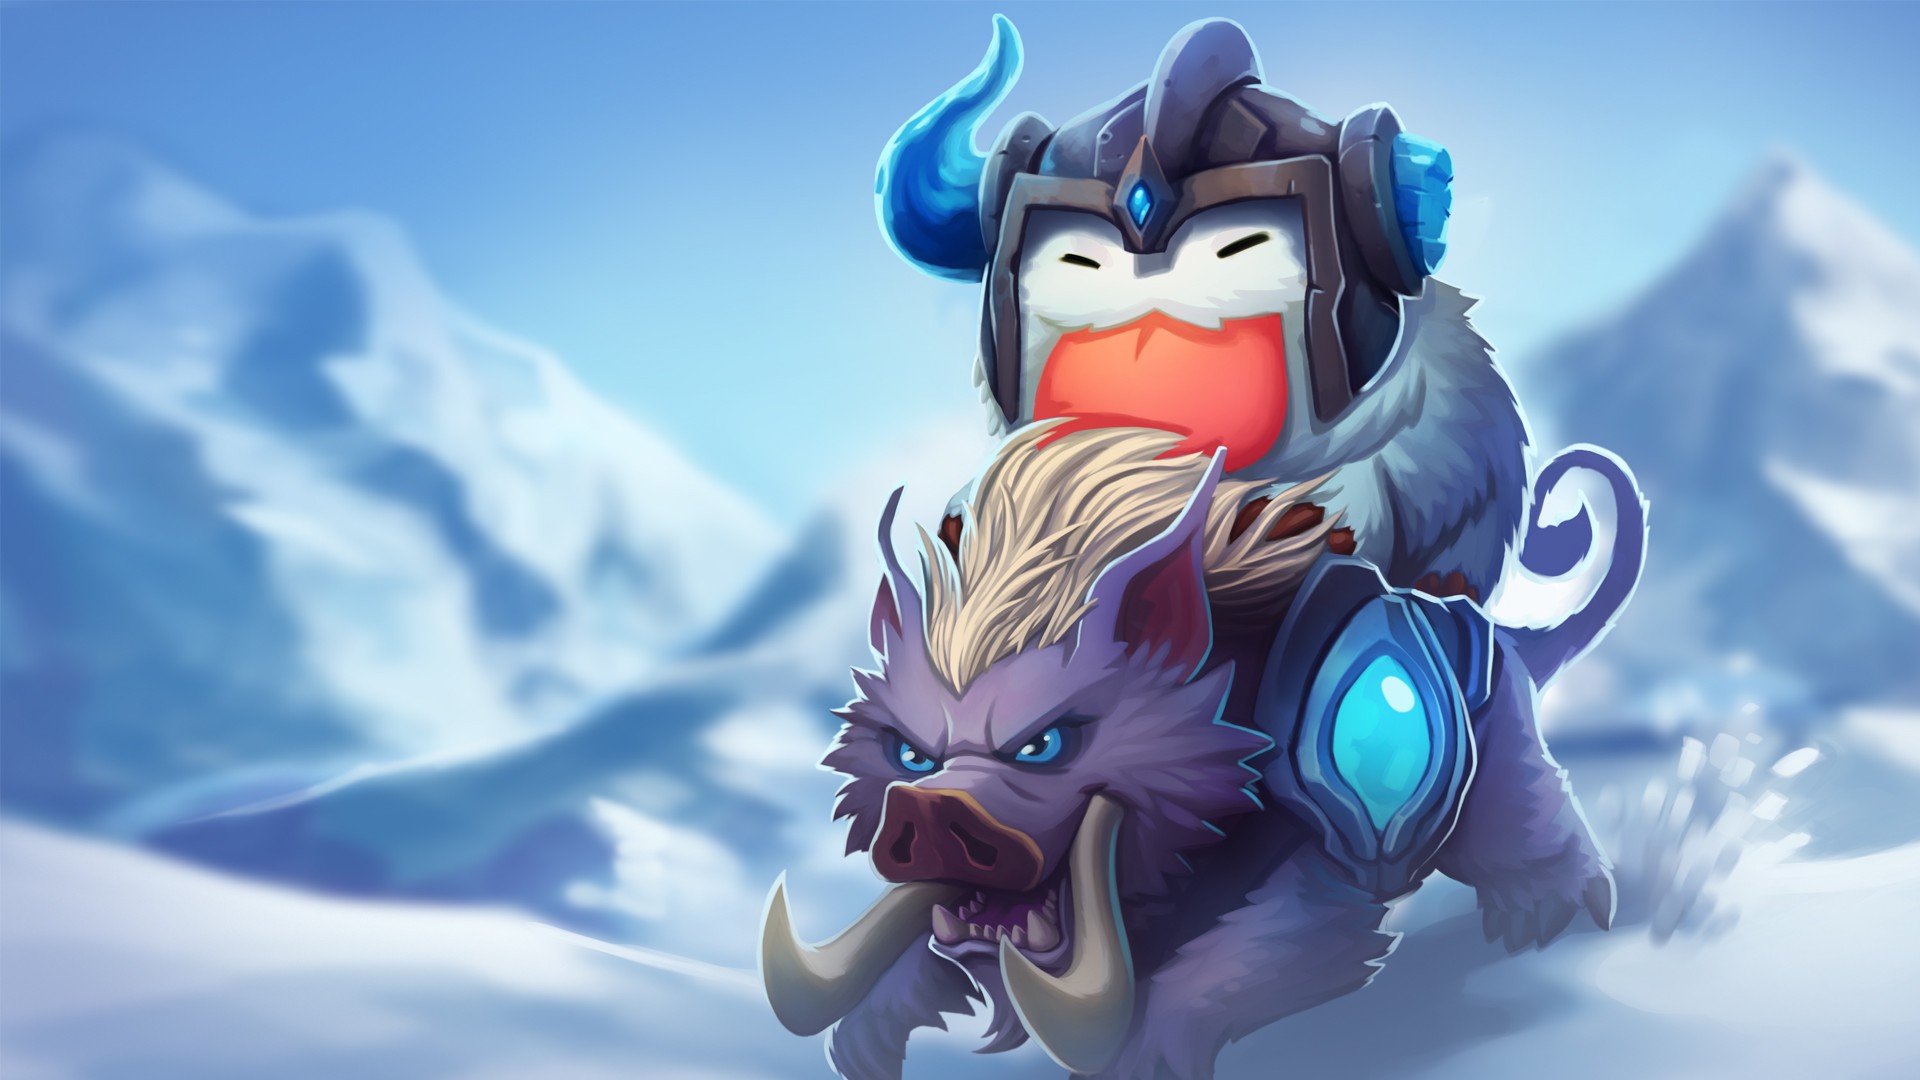 General 1920x1080 League of Legends Poro (League of Legends) video game art PC gaming video game characters digital art Sejuani (League of Legends)